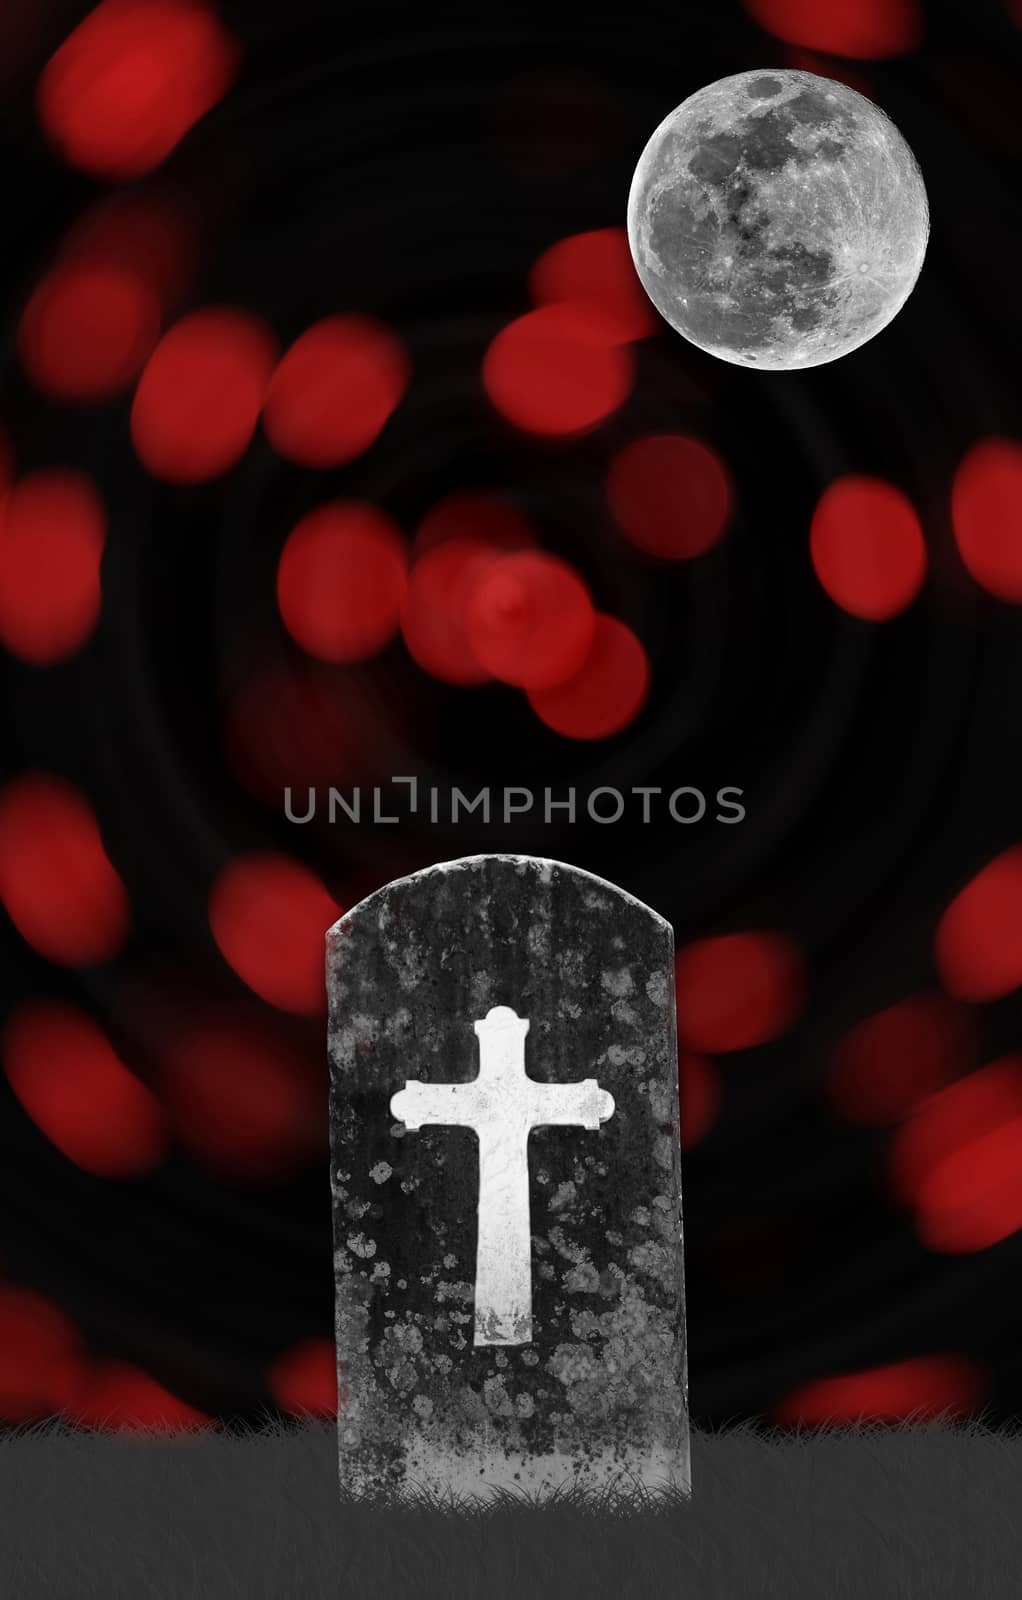 headstone in graveyard with full moon for halloween